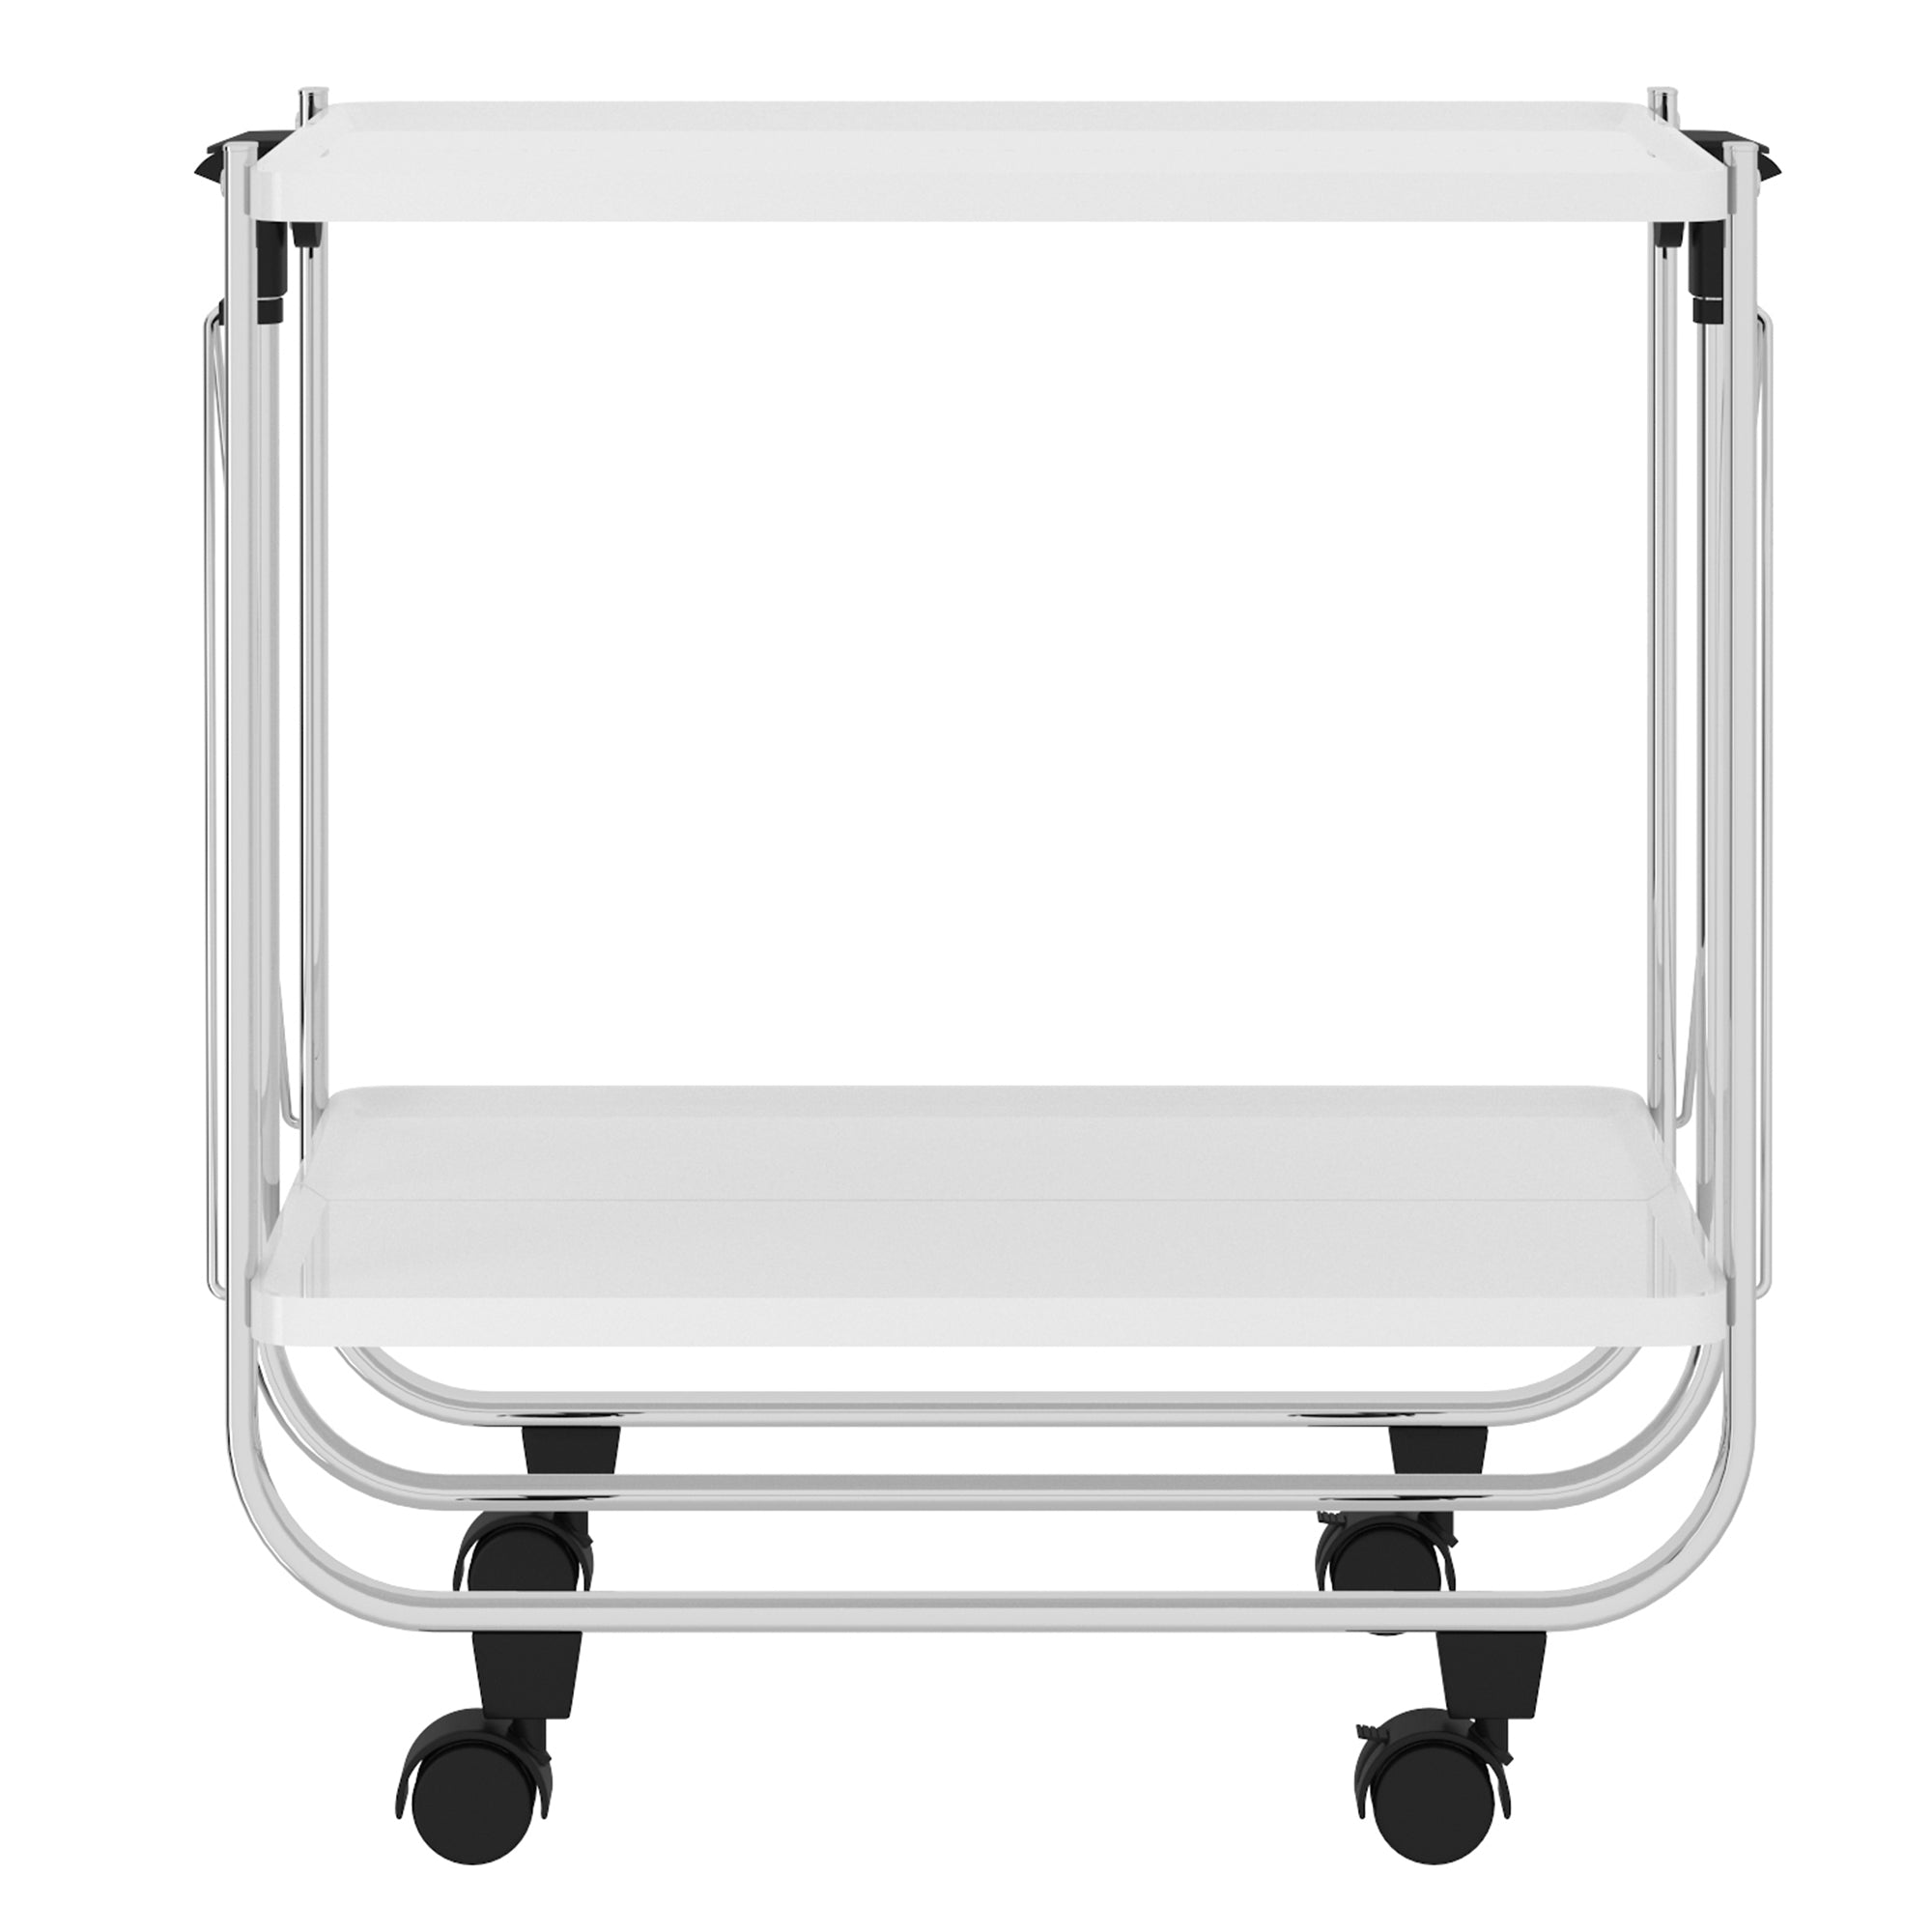 Sumi 2-tier Folding Bar Cart in White and Chrome